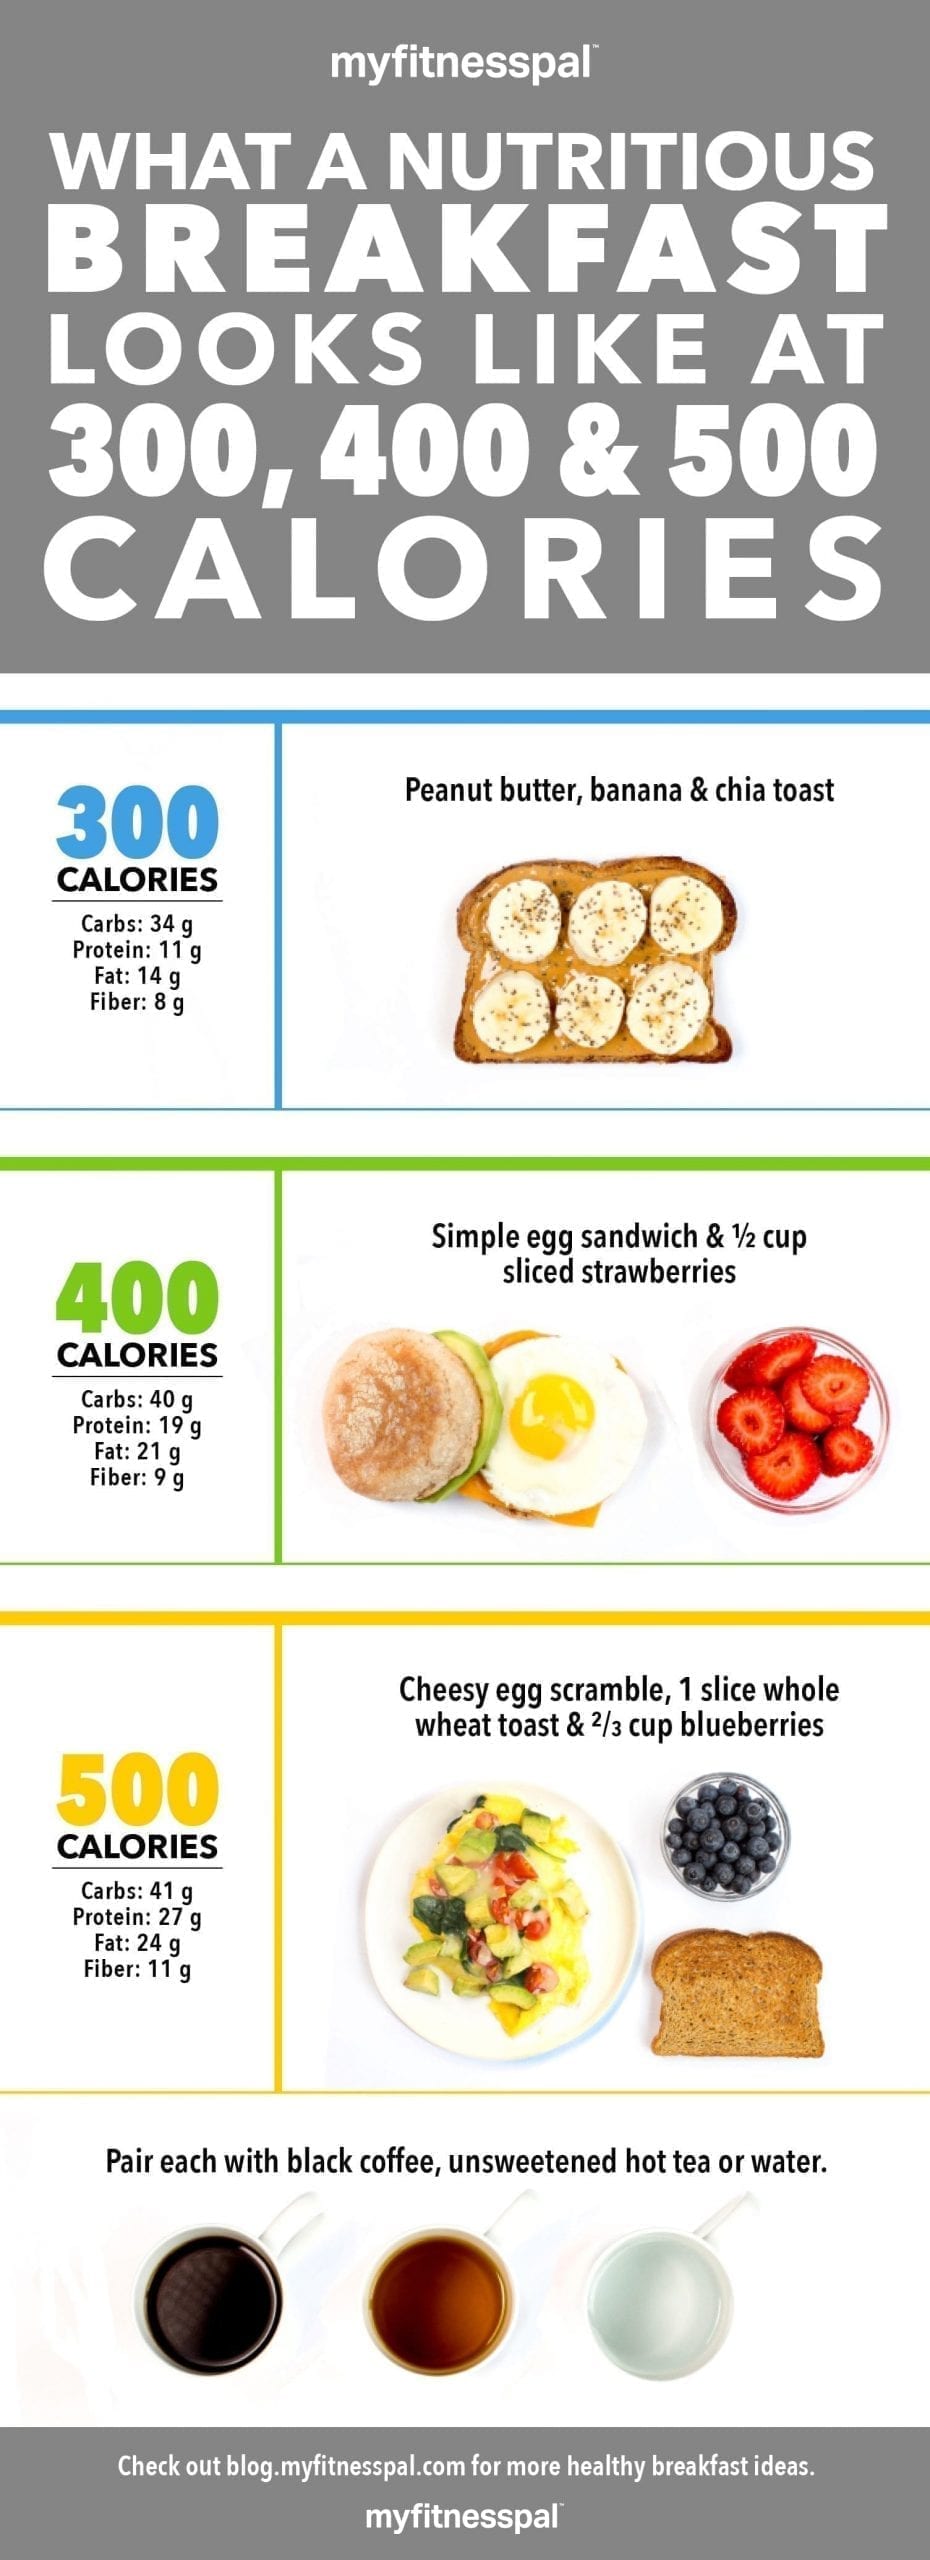 What A Nutritious Breakfast Looks Like At 300 400 And 500 Calories [infographic] Weight Loss